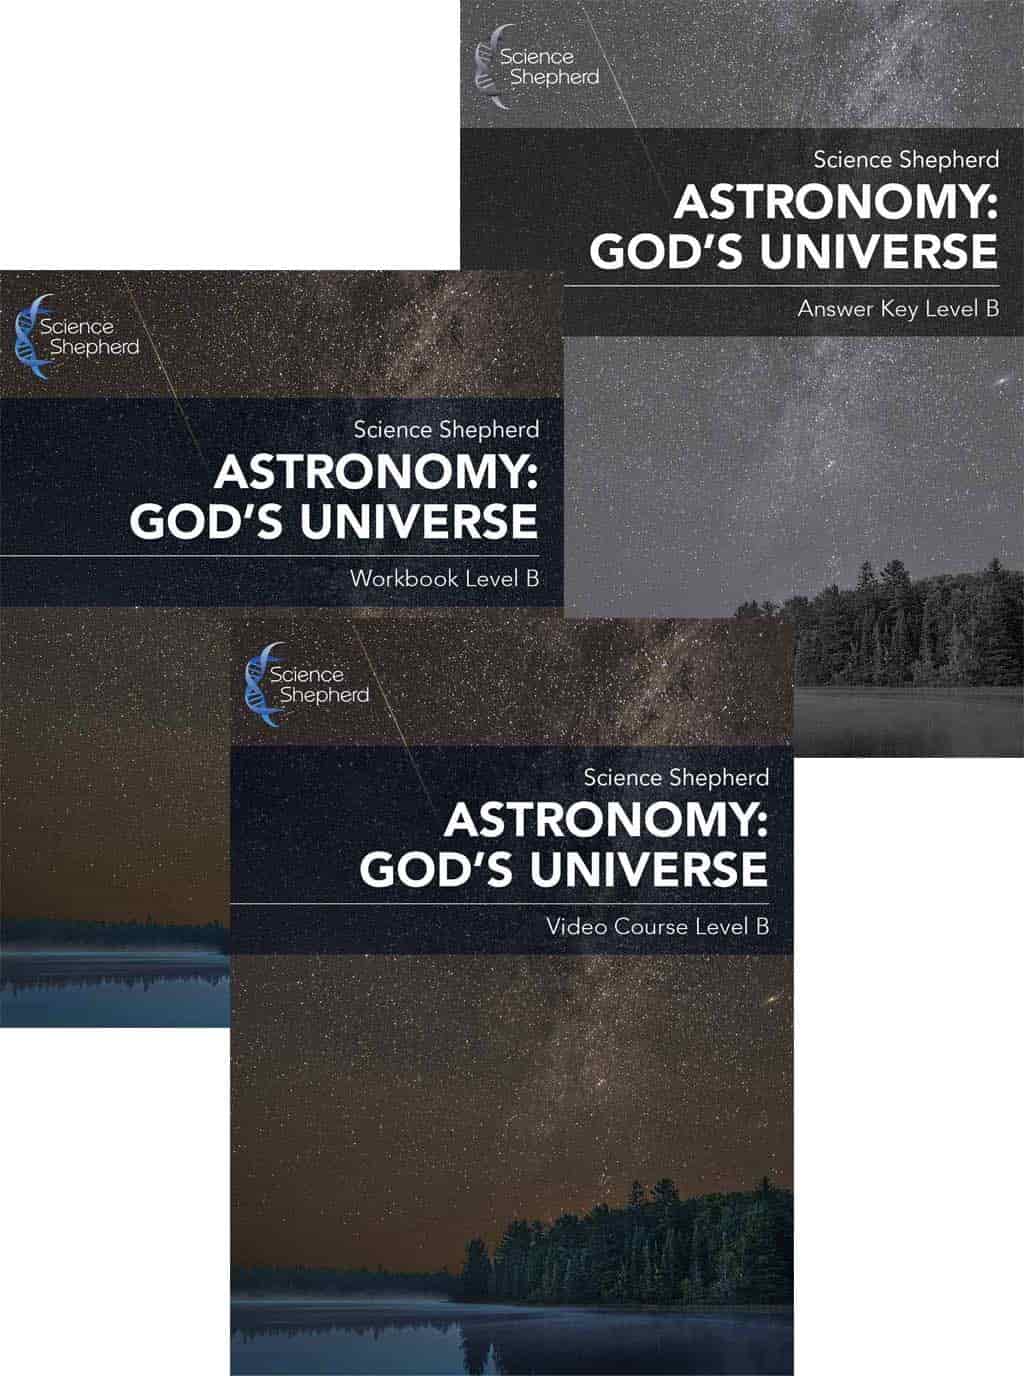 Christian astronomy curriculum Level B bundle cover of a video course, workbook and answer key